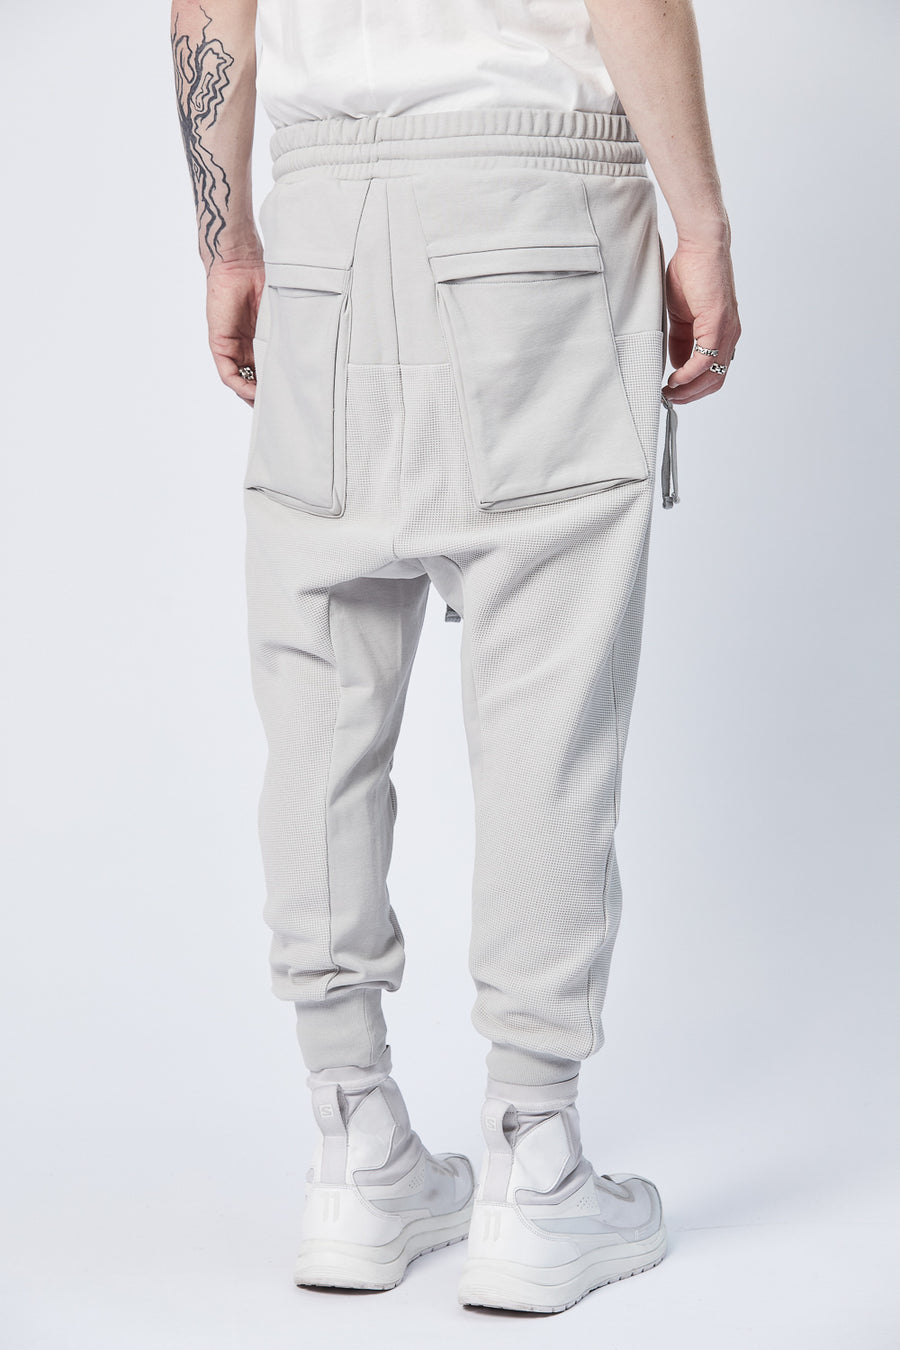 Buy the Thom Krom M ST 438 Sweatpants in Silver at Intro. Spend £50 for free UK delivery. Official stockists. We ship worldwide.